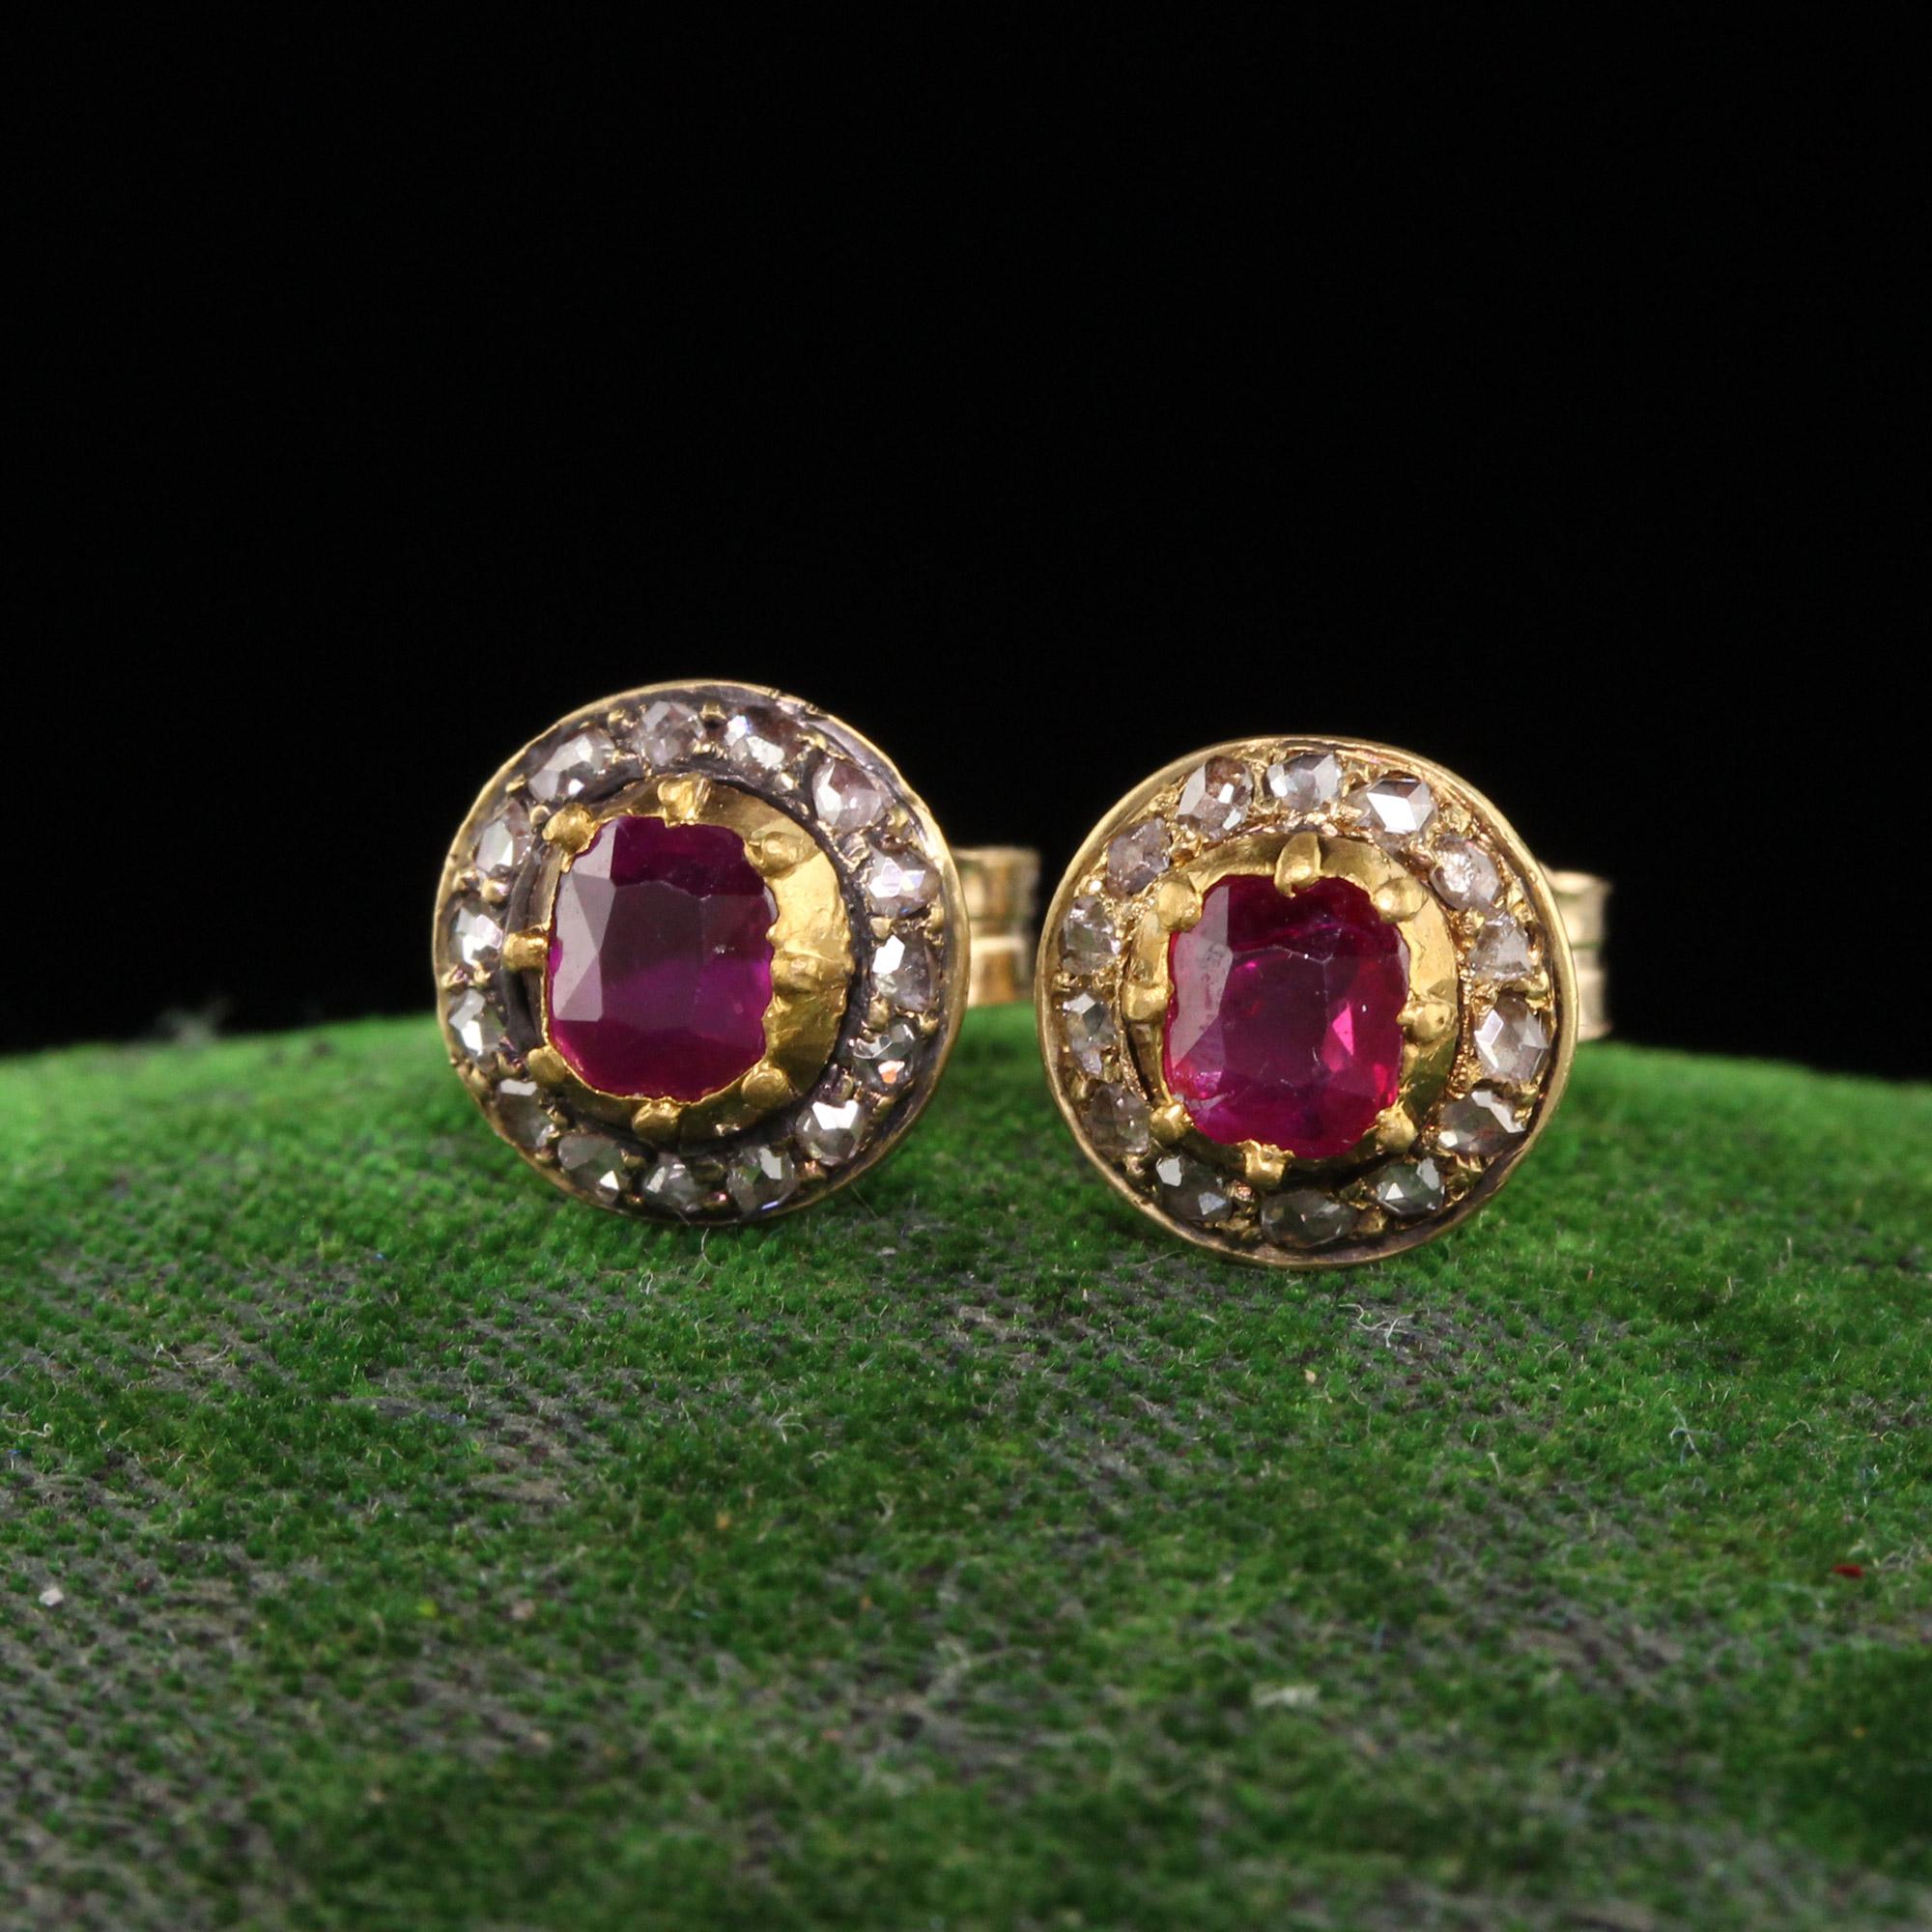 Beautiful Antique Victorian 18K Yellow Gold Burma Ruby and Diamond Stud Earrings. This beautiful pair of earrings are crafted in 18k yellow gold. The center holds natural burma rubies and they are surrounded by rose cut diamonds. They are set in